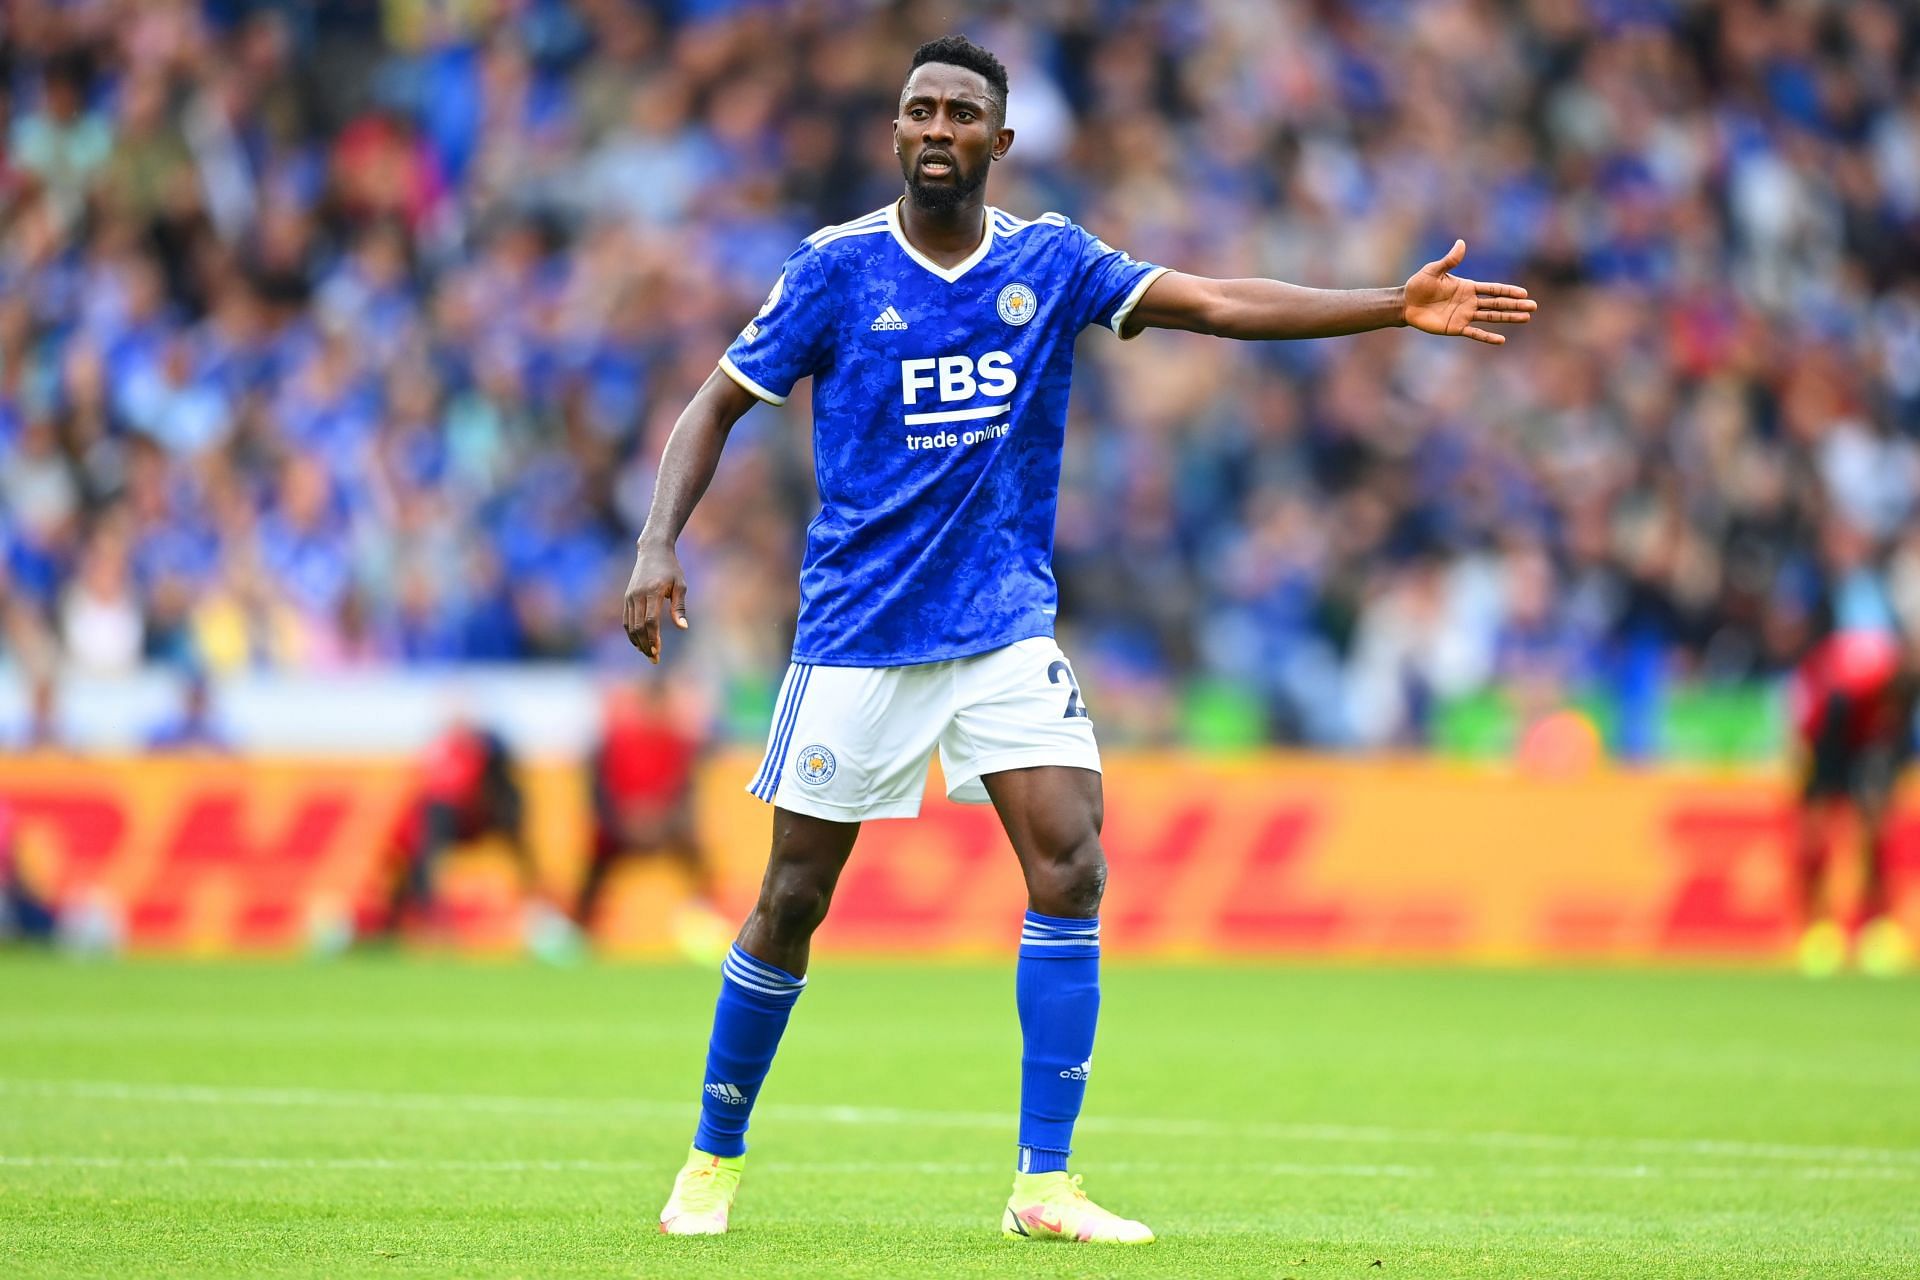 Manchester United are planning a move for Wilfred Ndidi in January.